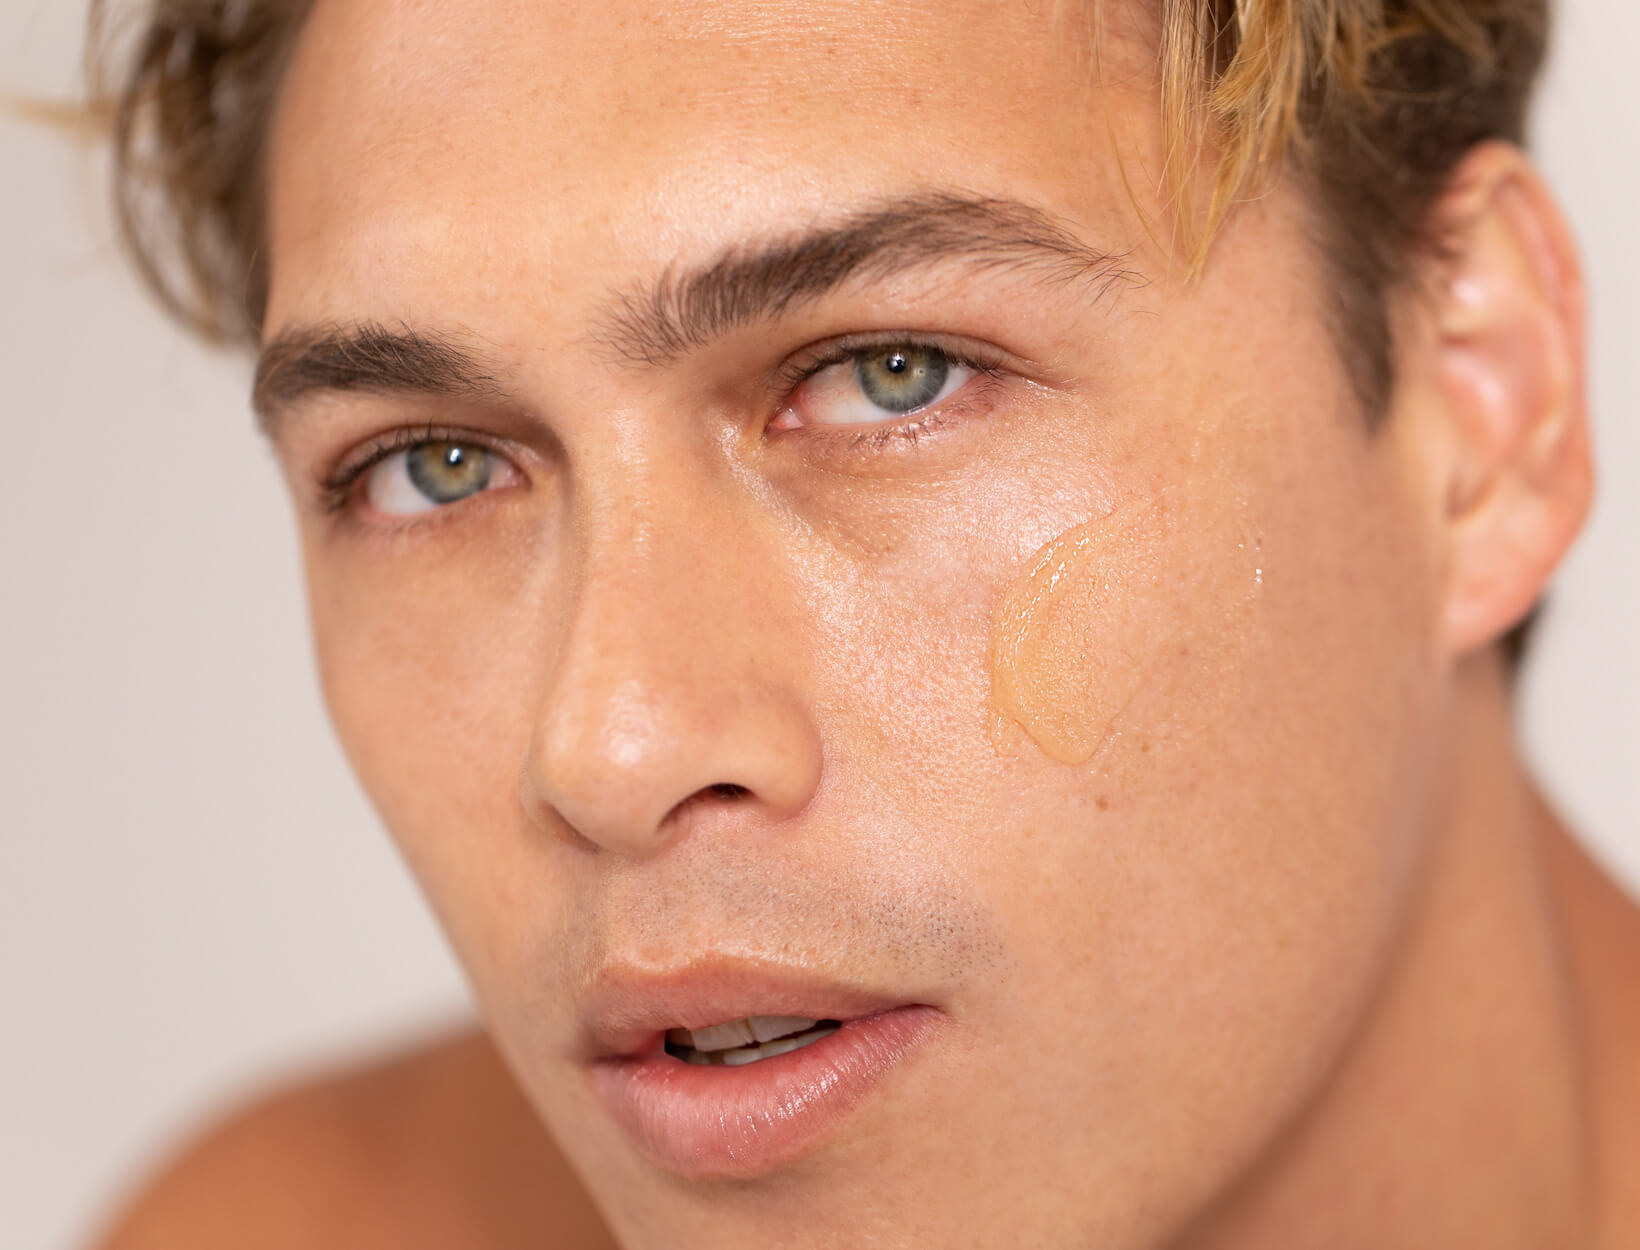 Skin Care for Men: Full Product Routine Guide | goop